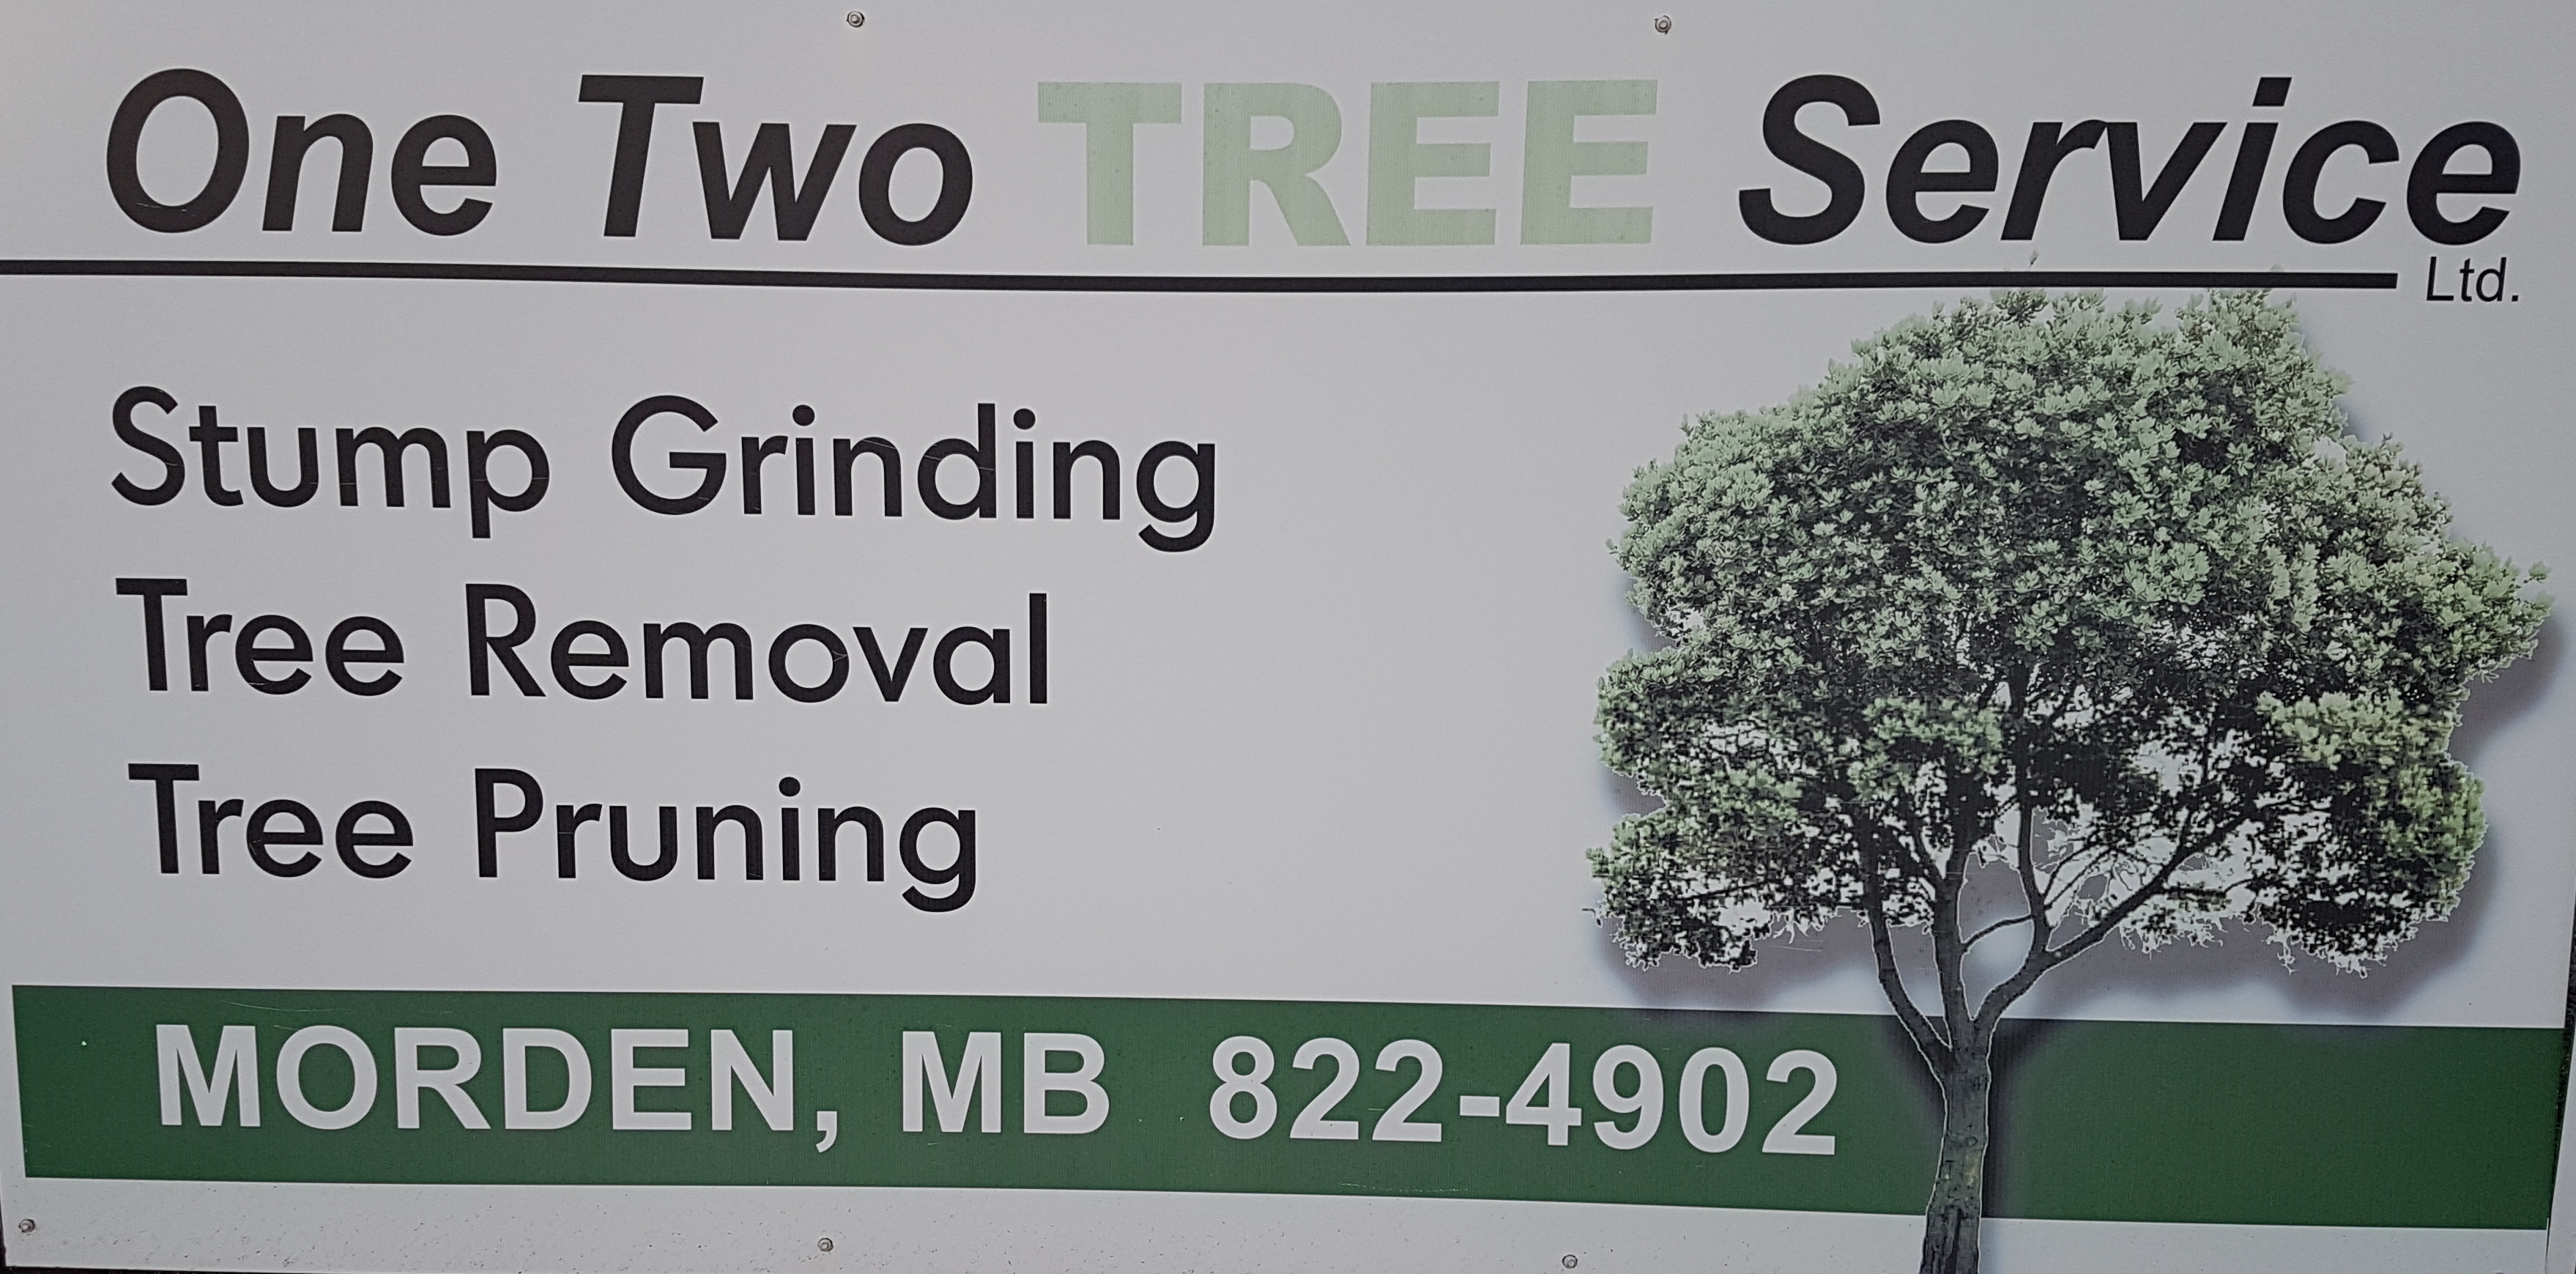 ONE TWO TREE SERVICE